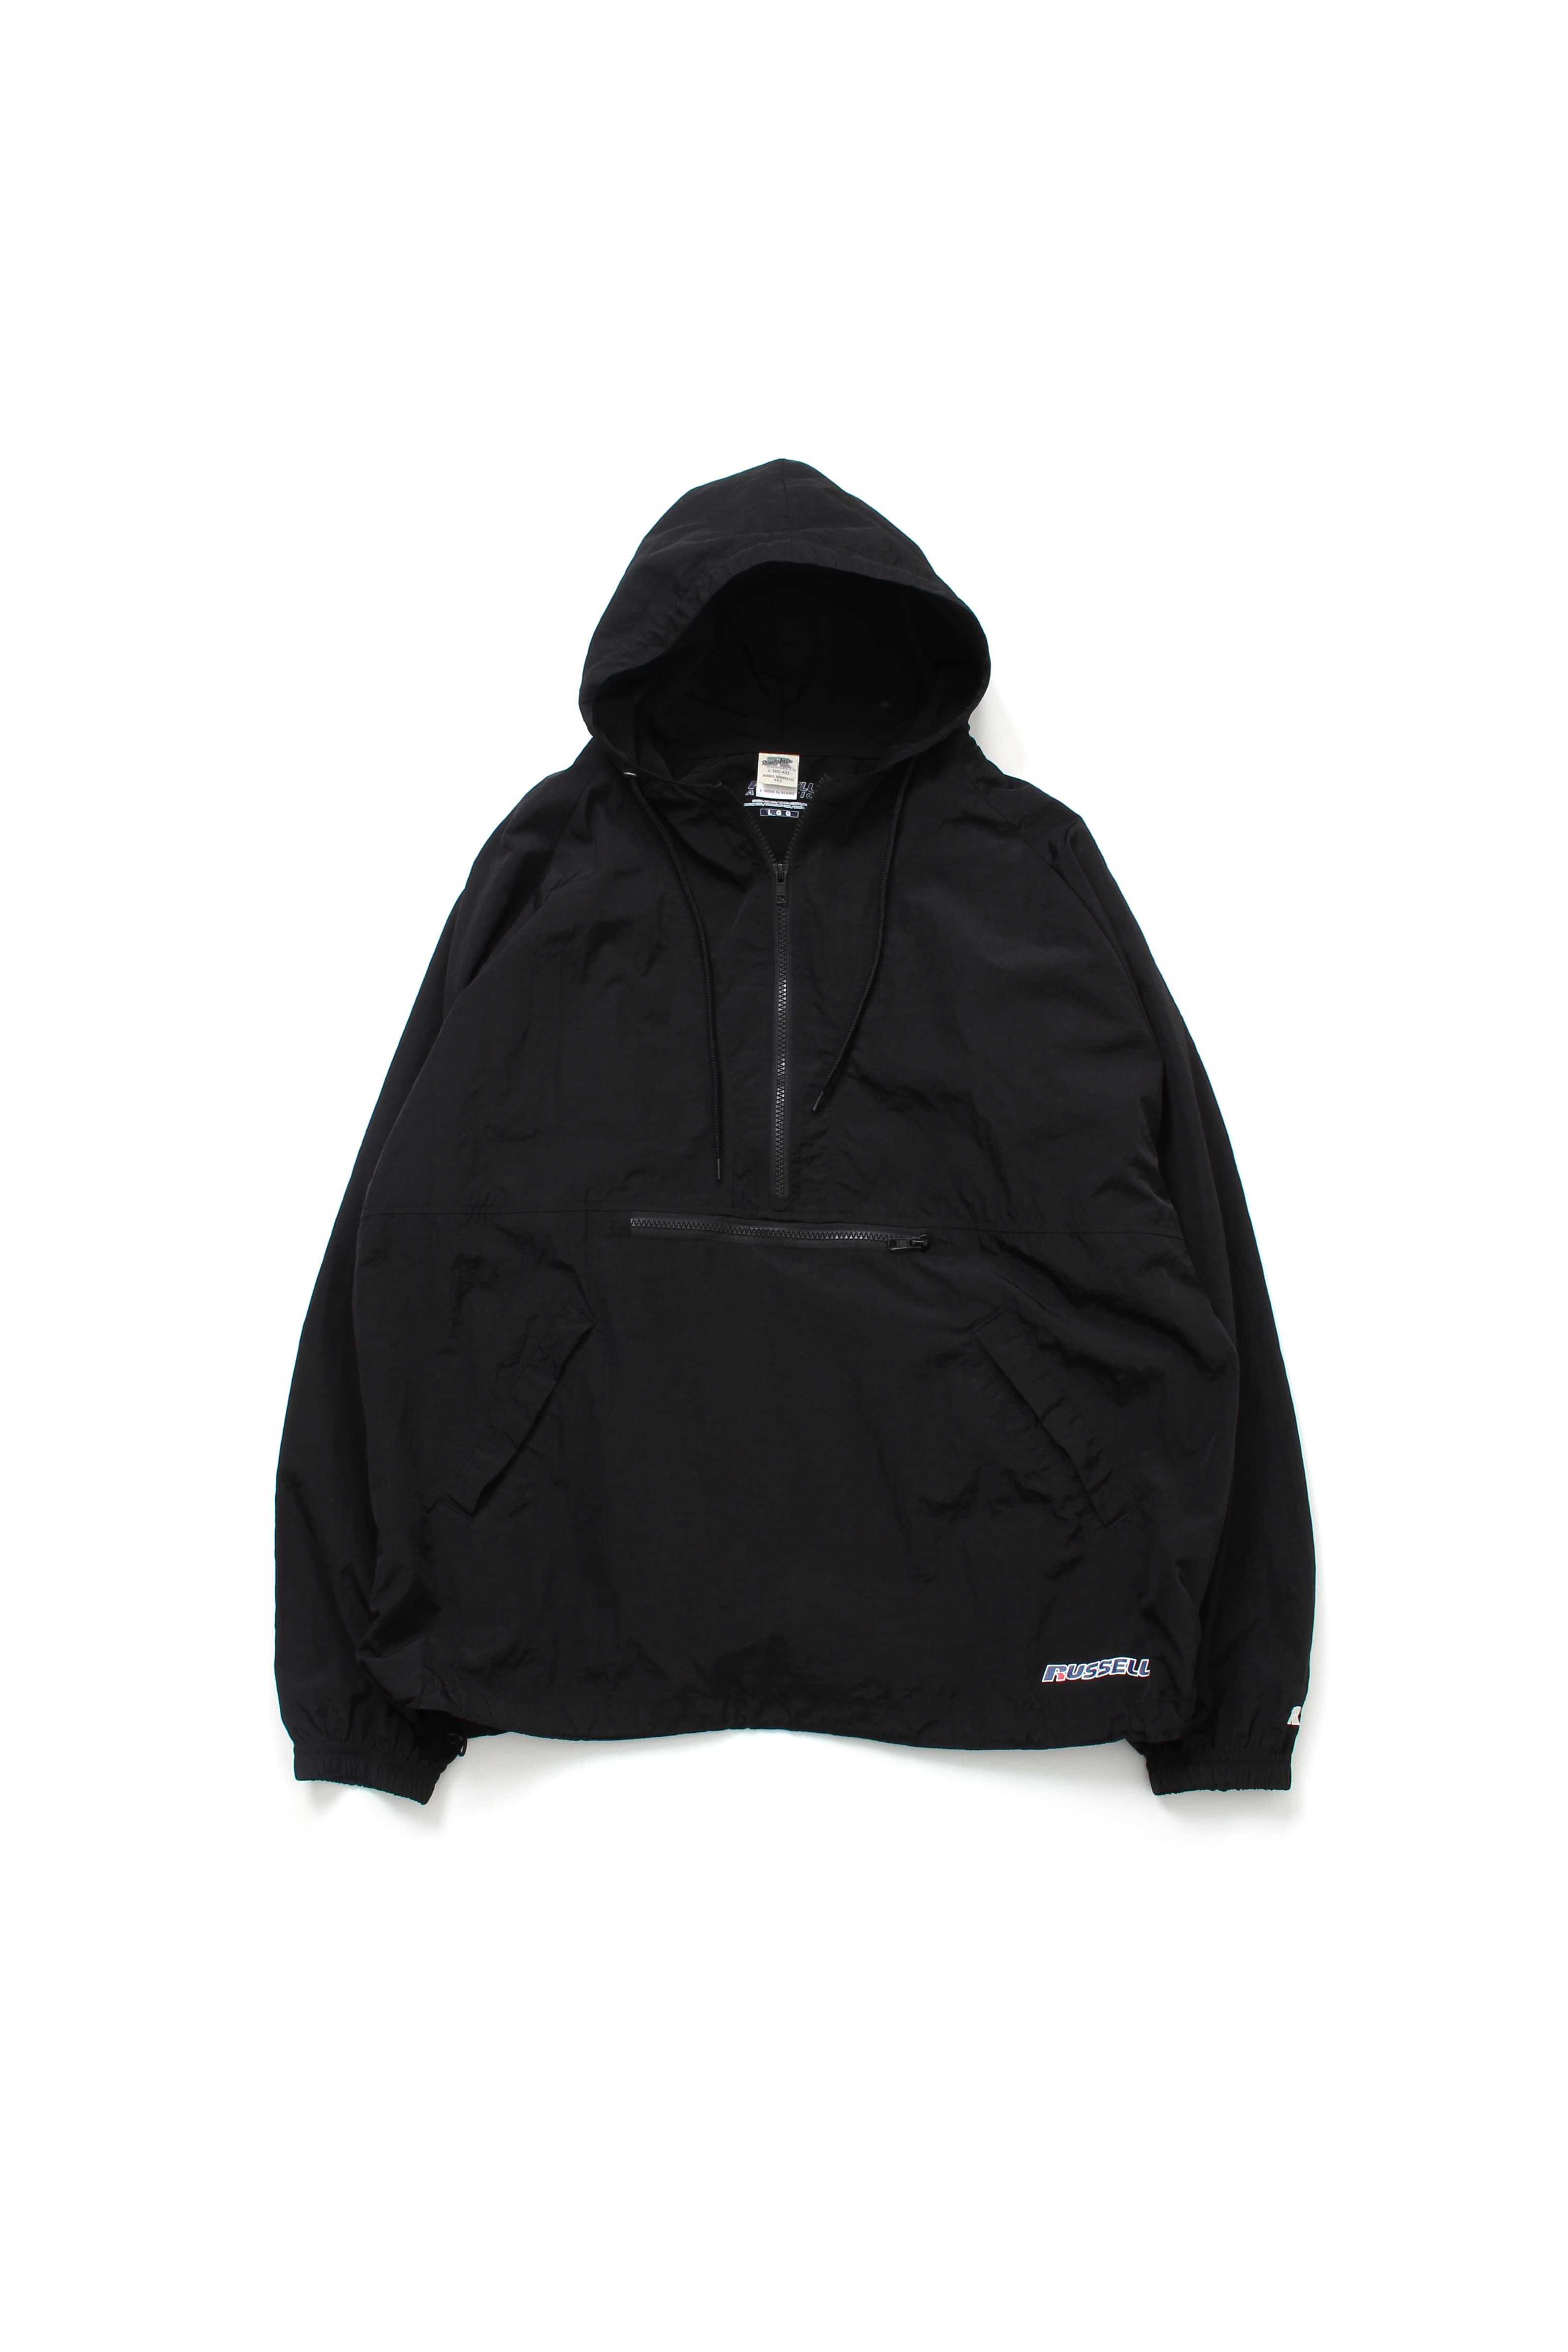 BEAMS x RUSSELL ATHLETIC Anorak